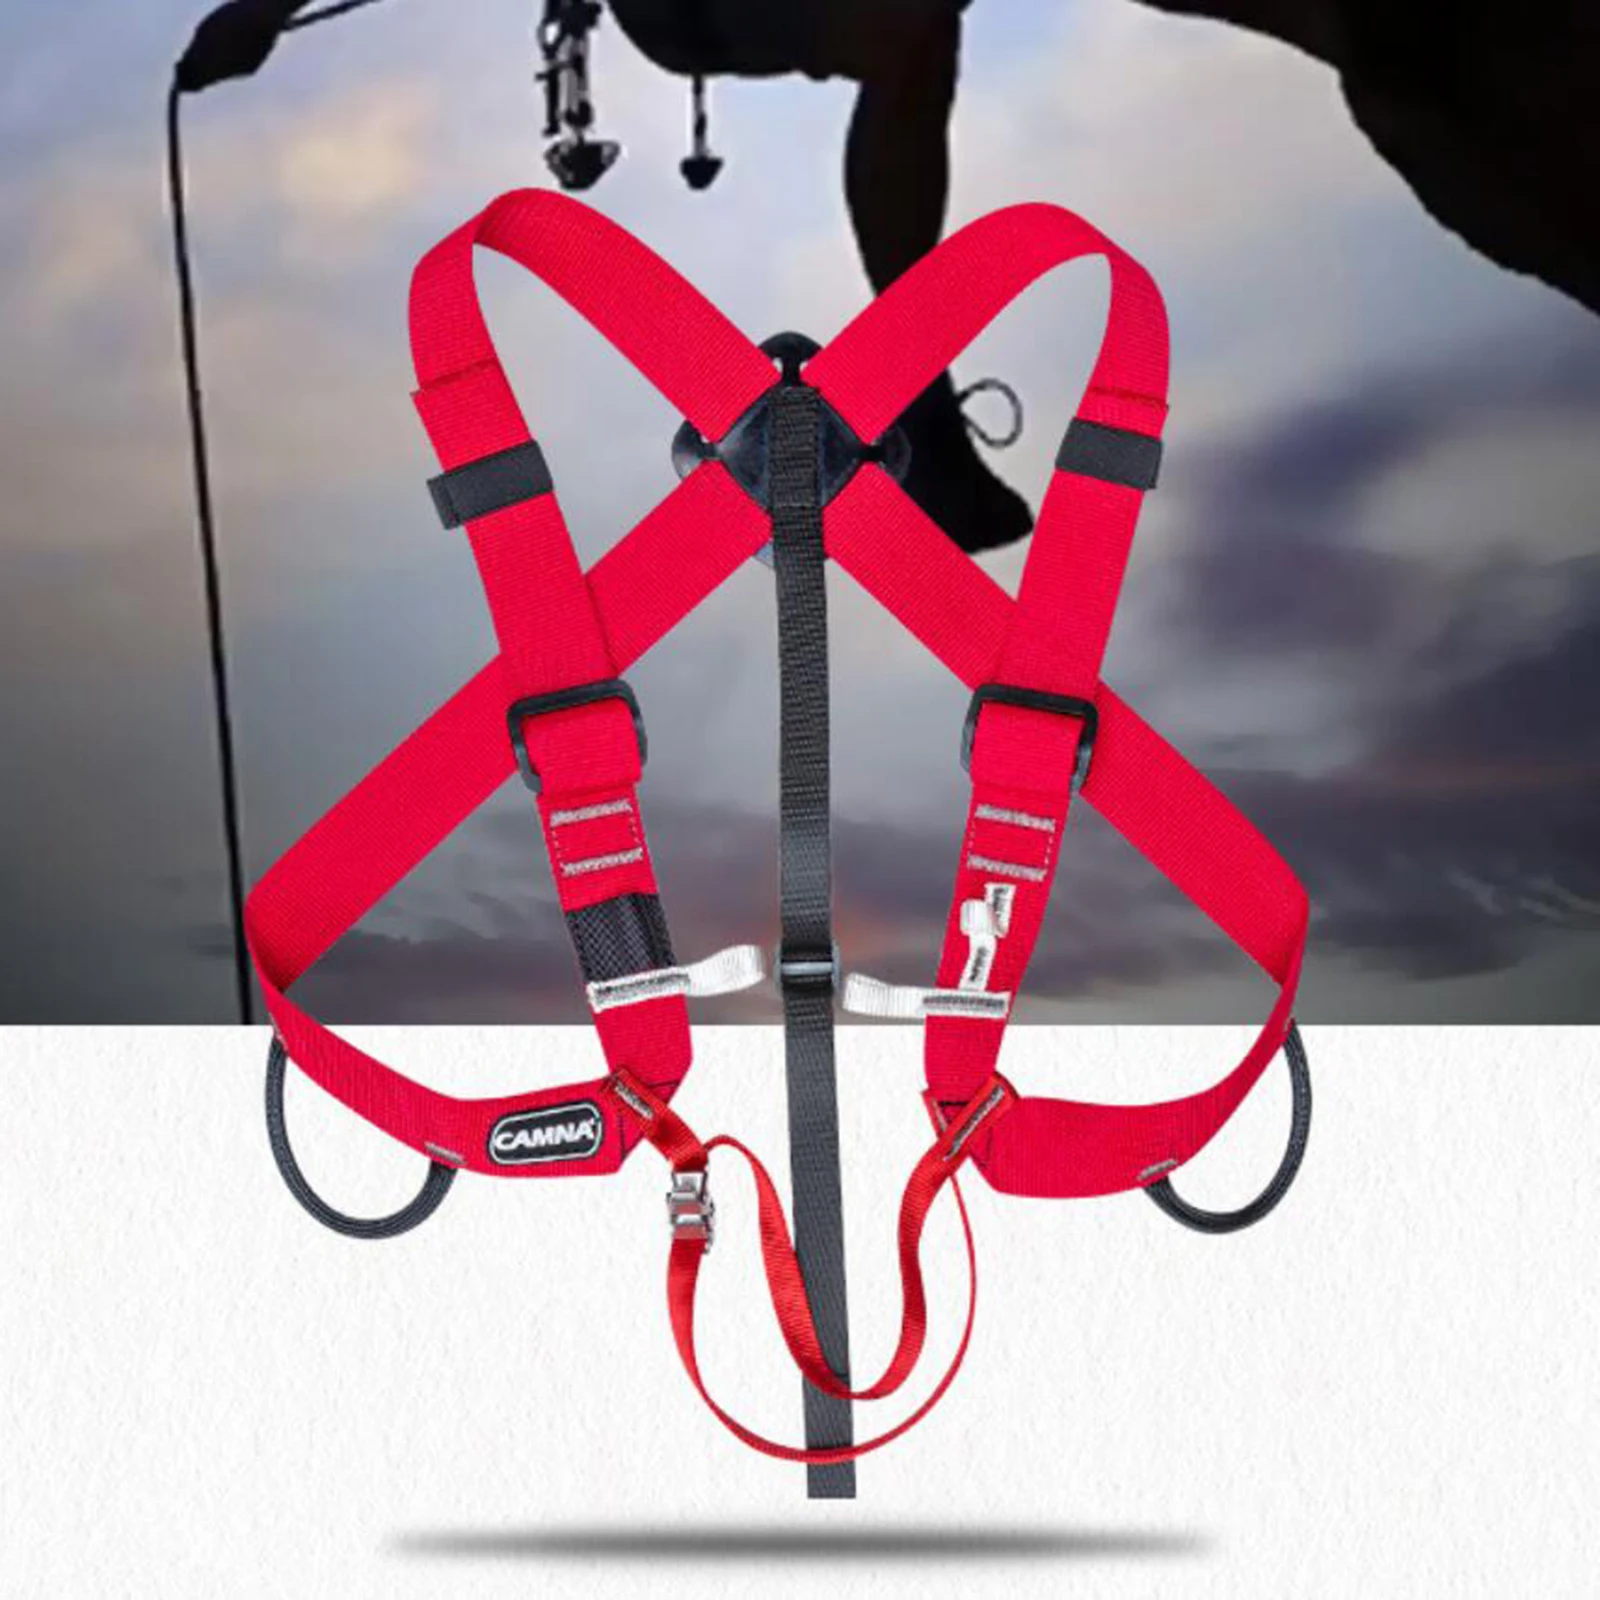 Climbing Safety Harness Ascending Straps Adjustable Fixed Belt Caving Canyoning Survival